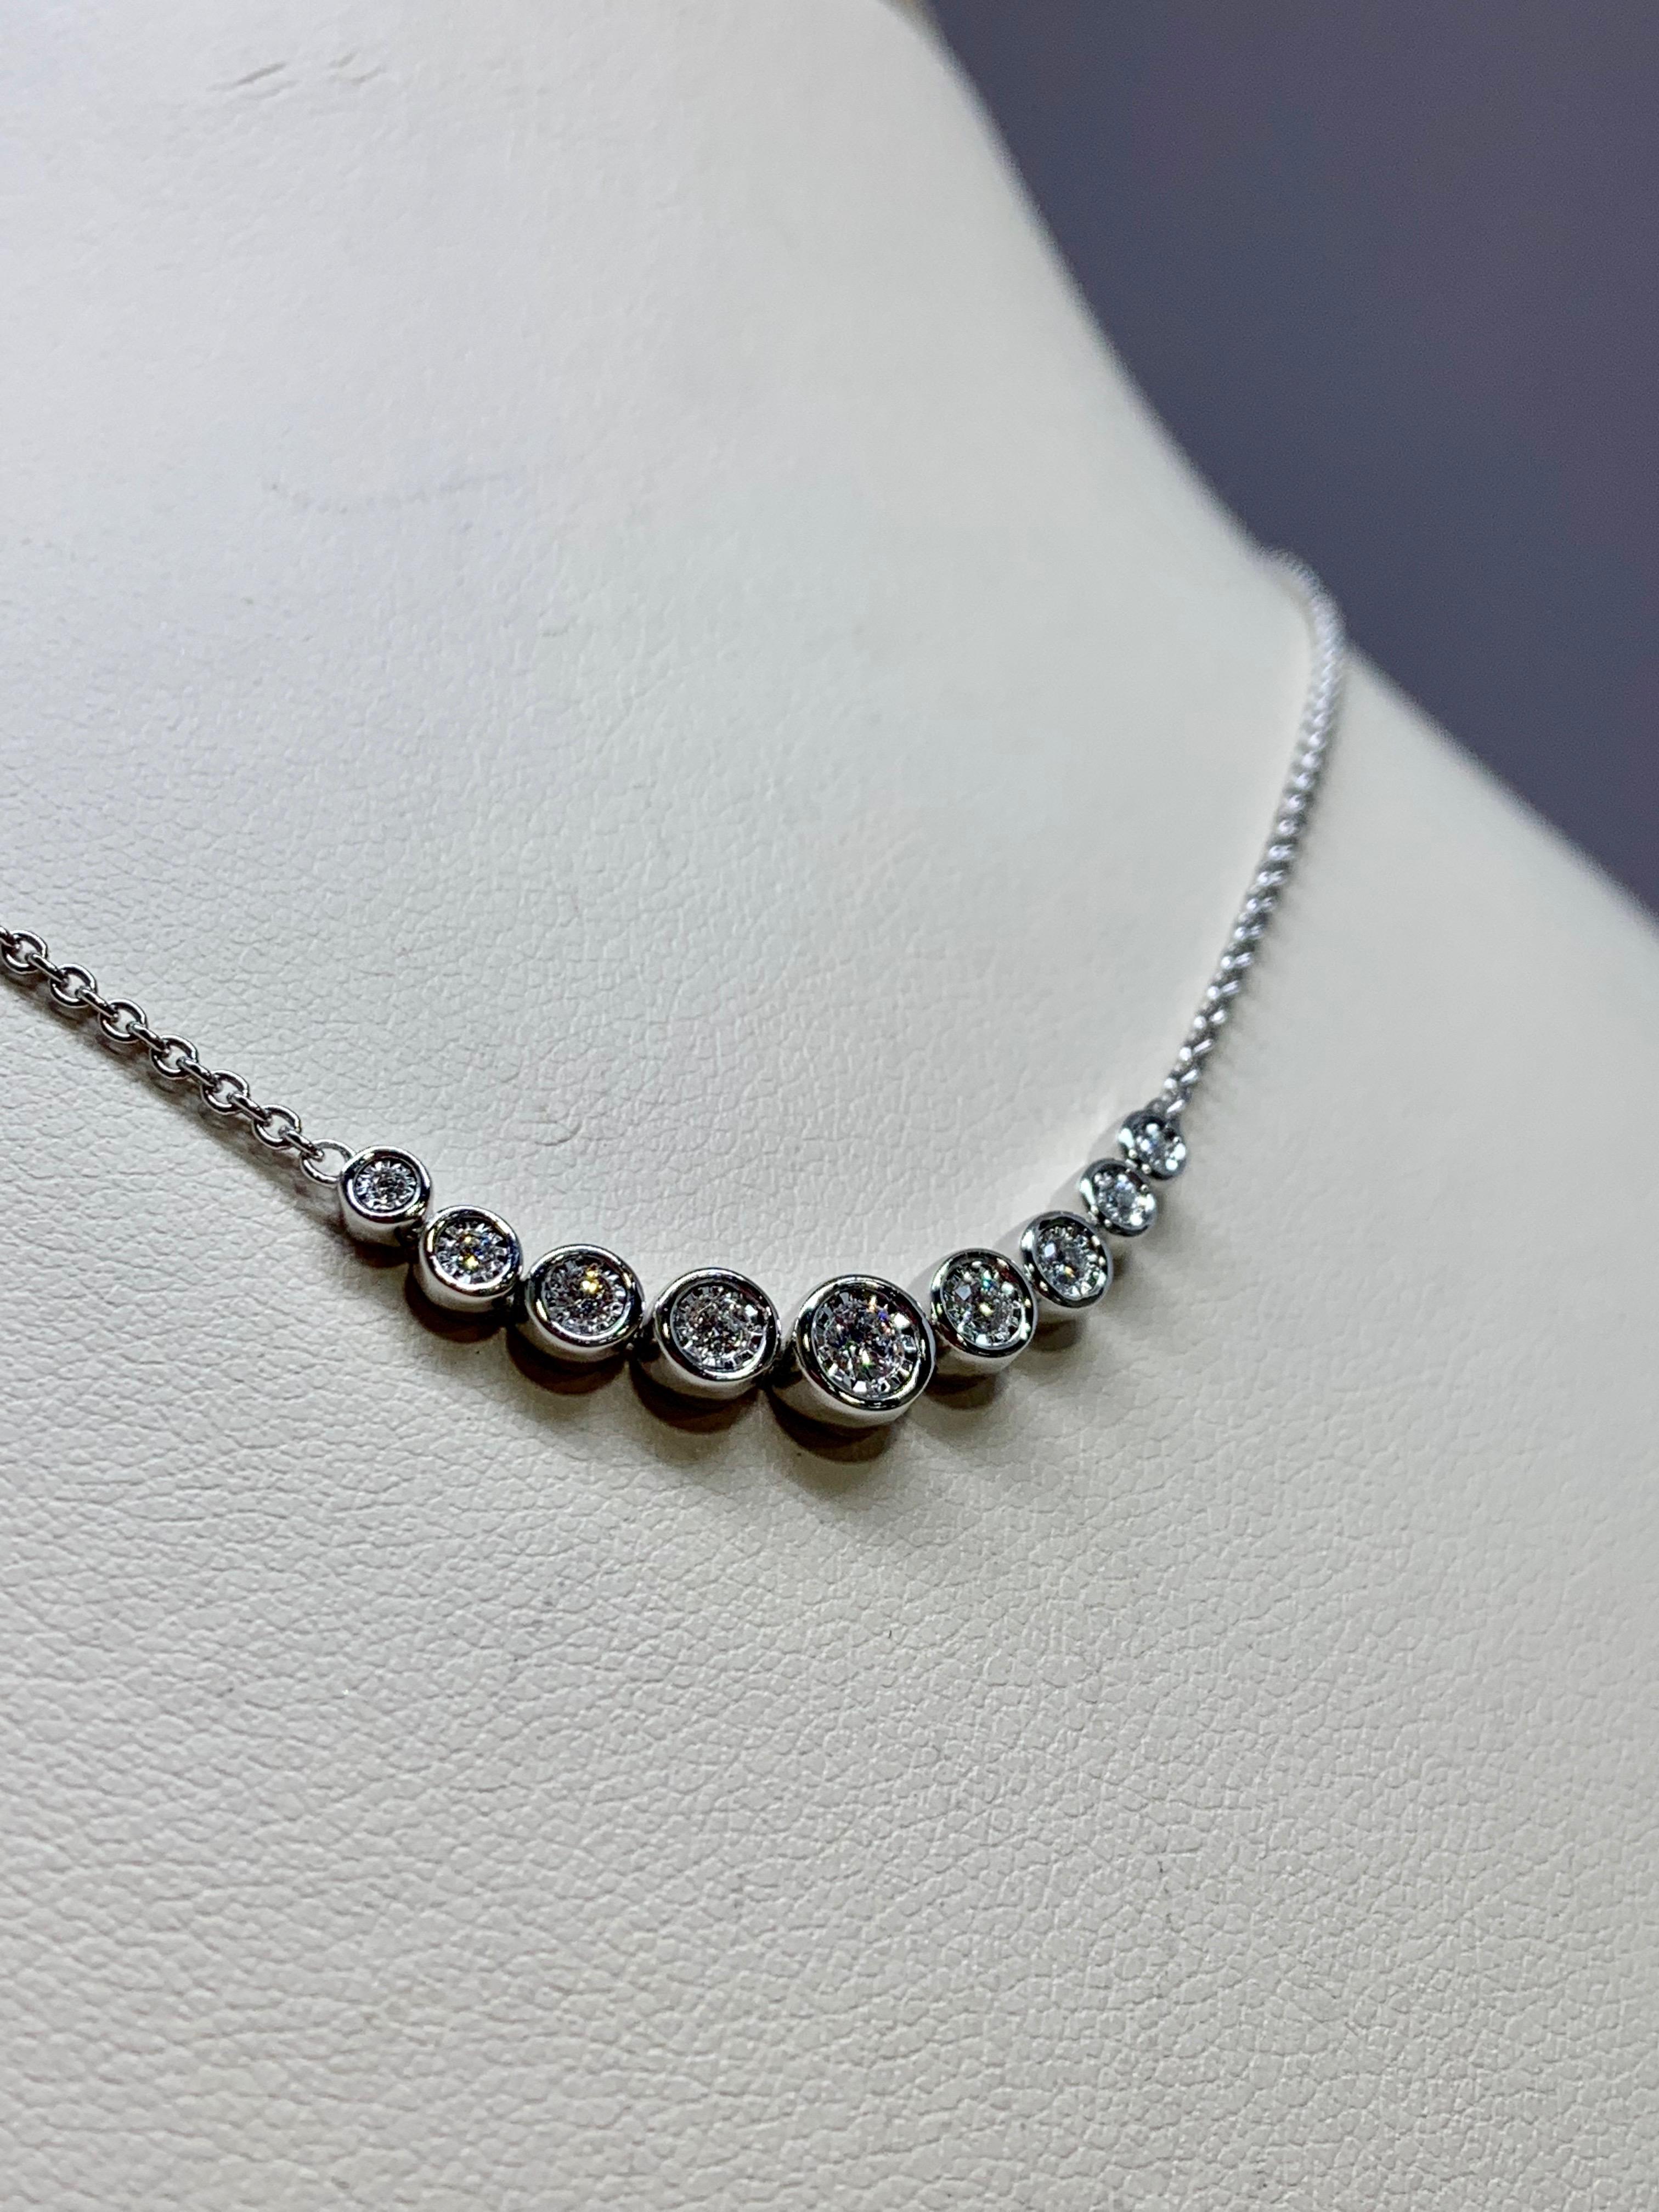 This classic bezel necklace features 9 round diamonds totaling 0.25 carats. The diamonds are fixed on a 14k white gold cable chain with a sturdy lobster claw clasp. The bezel settings are designed to be both flexible and comfortable to wear!